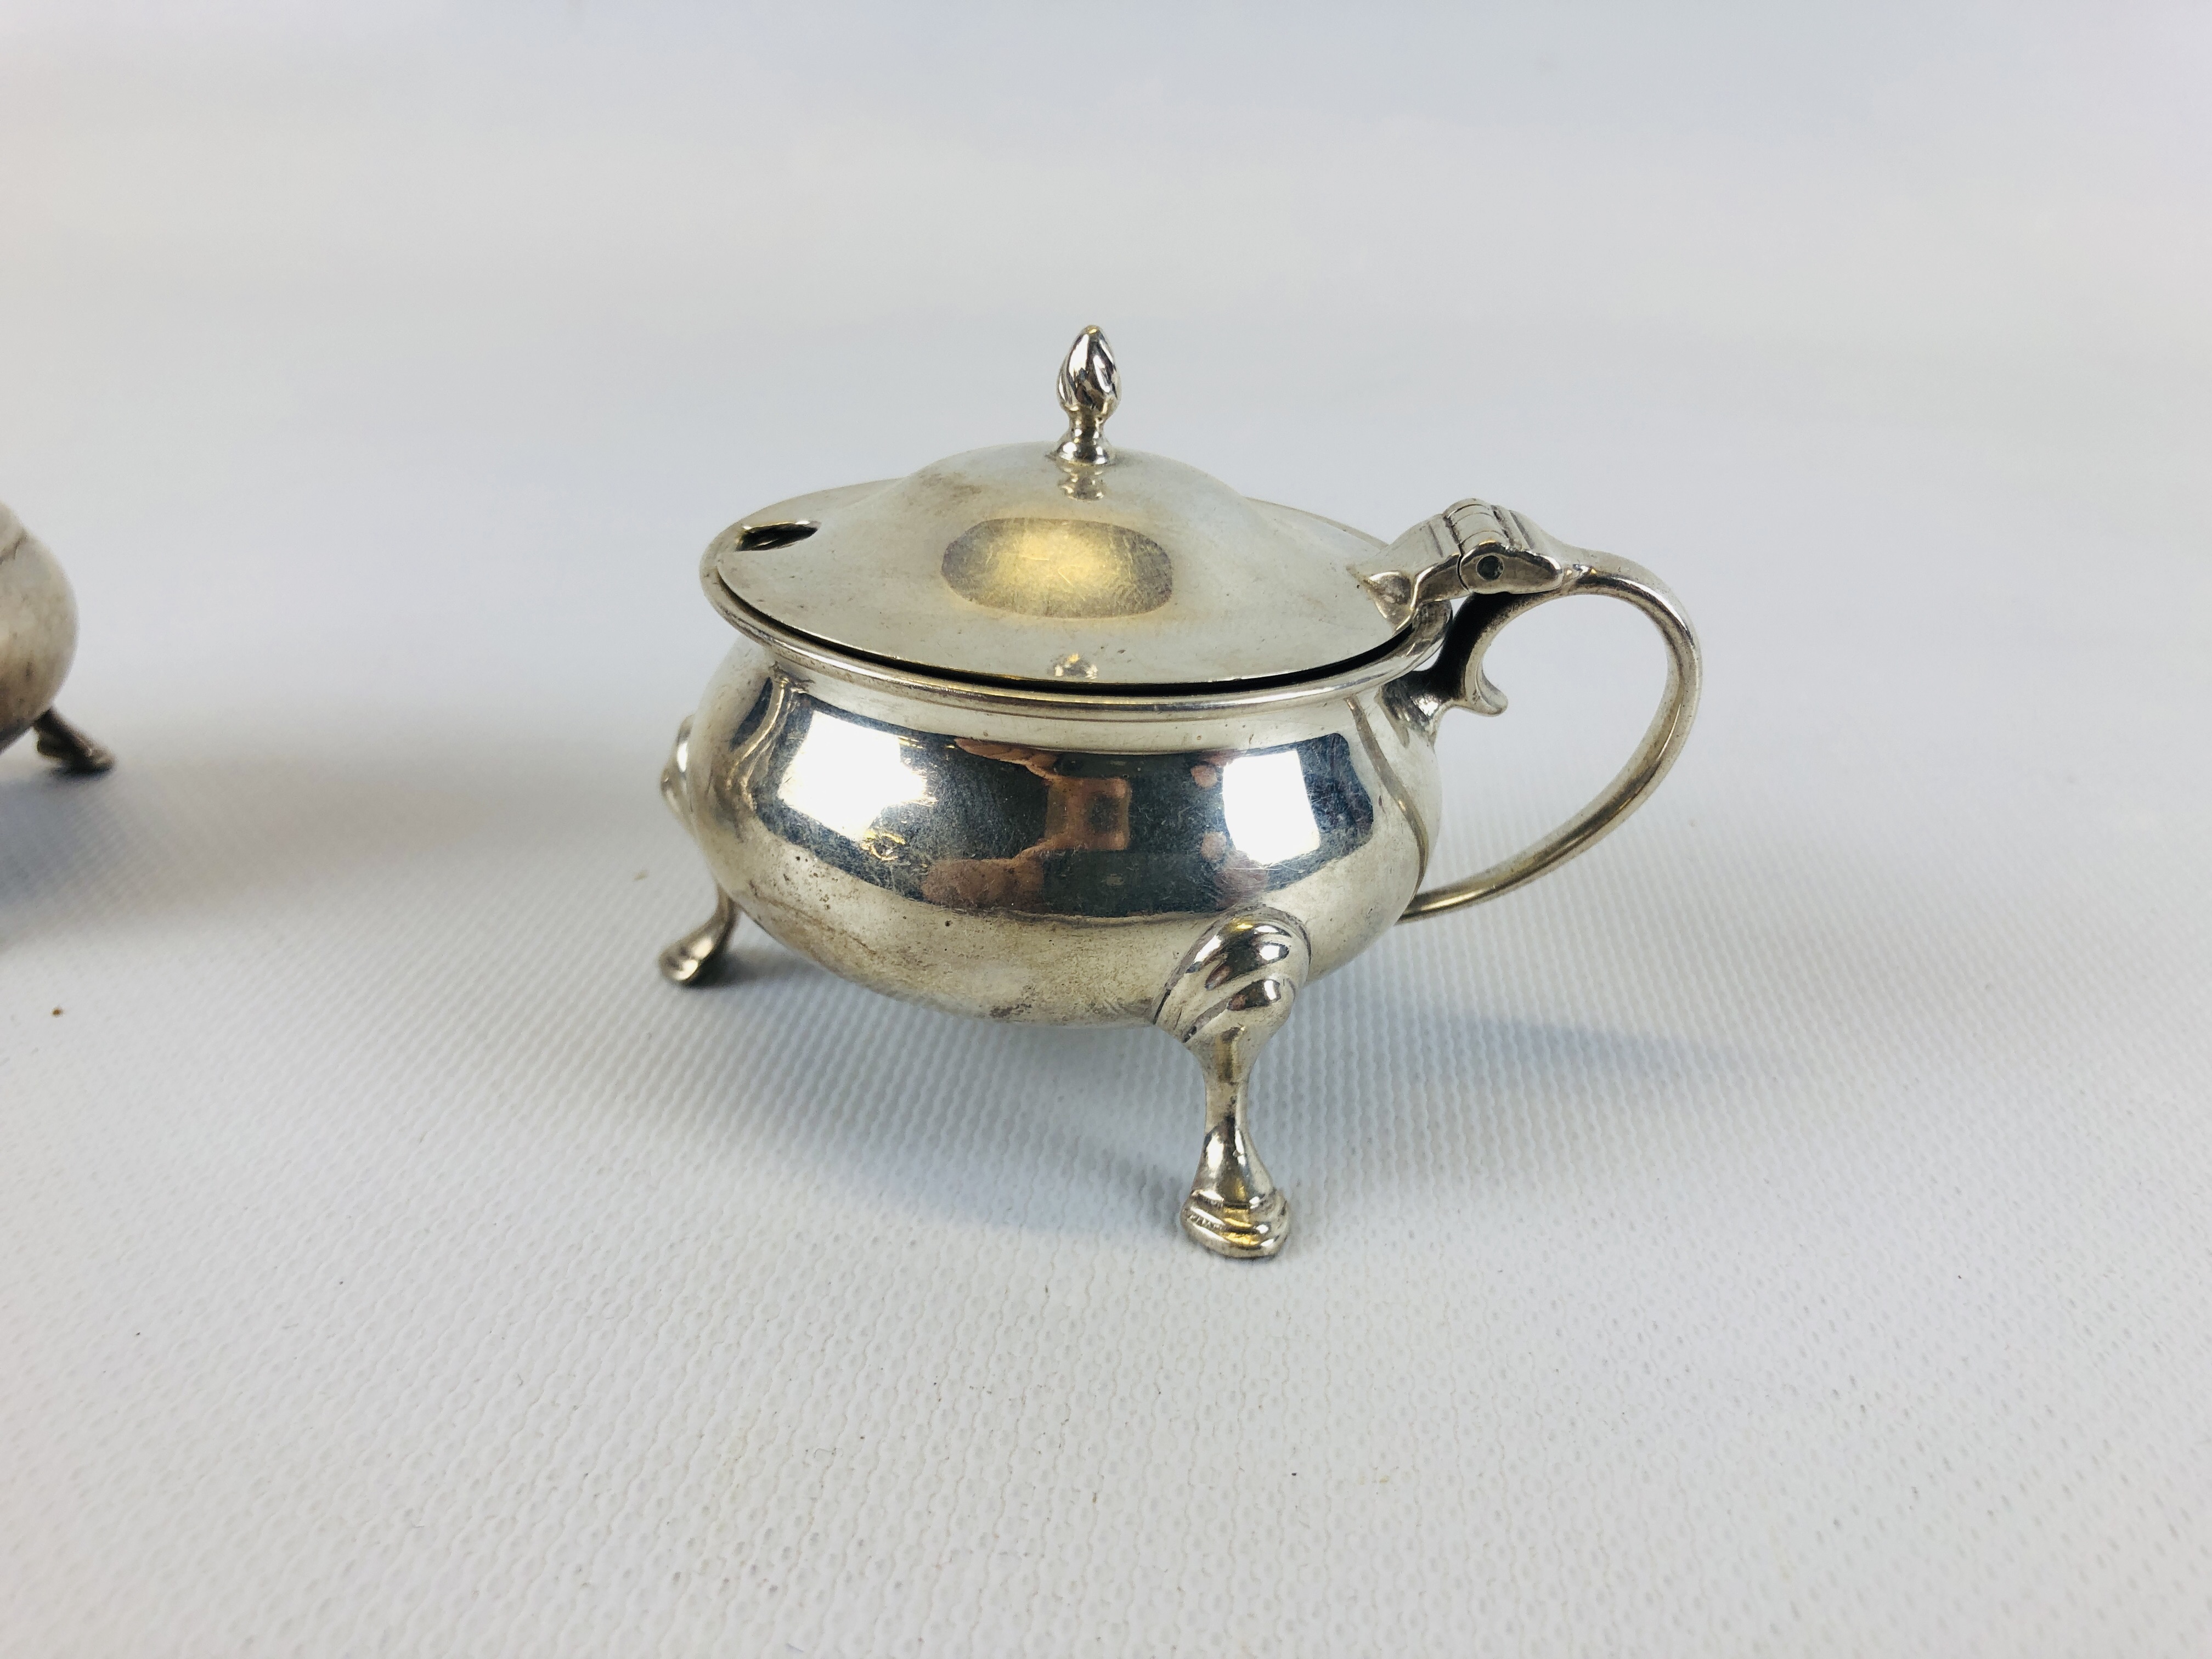 MATCHED SET OF SILVER CONDIMENTS A PAIR OF MUSTARDS LONDON 1940, - Image 12 of 23